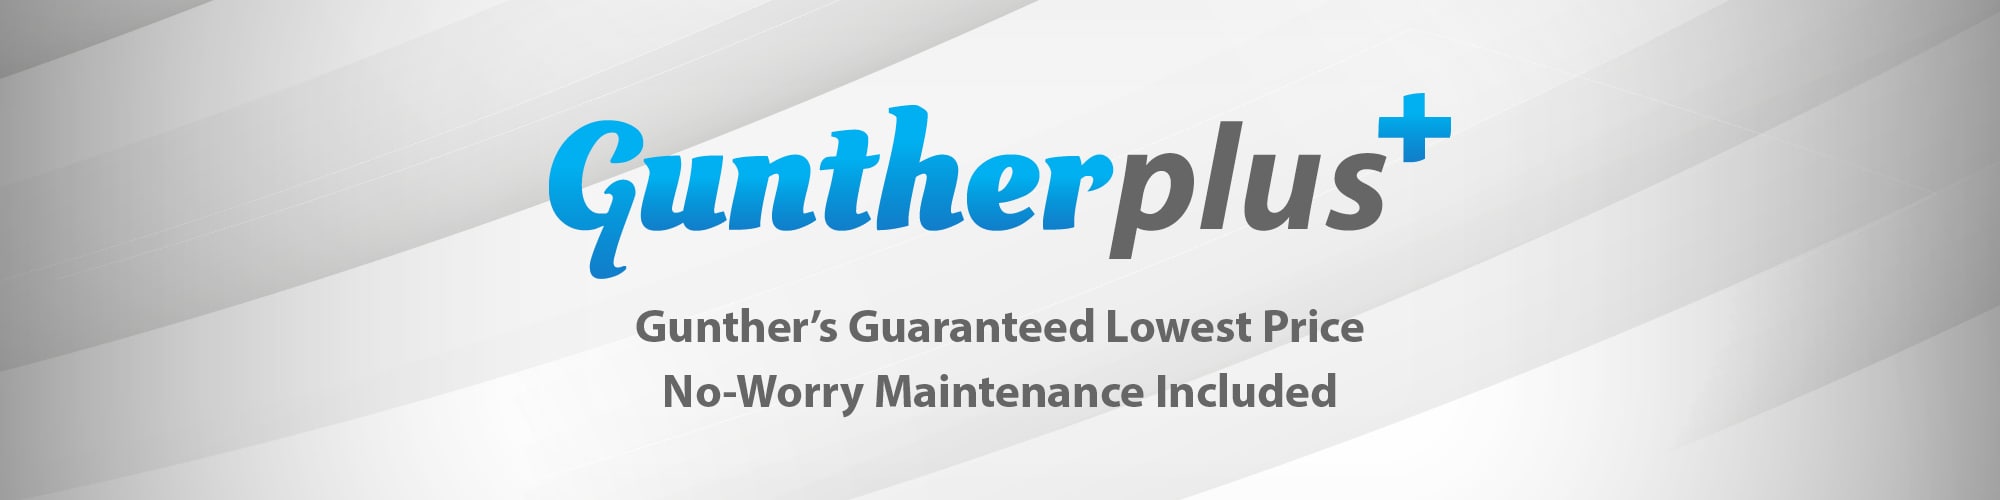 Gunther Plus. Gunther's guaranteed lowest price, no-worry maintenance included.